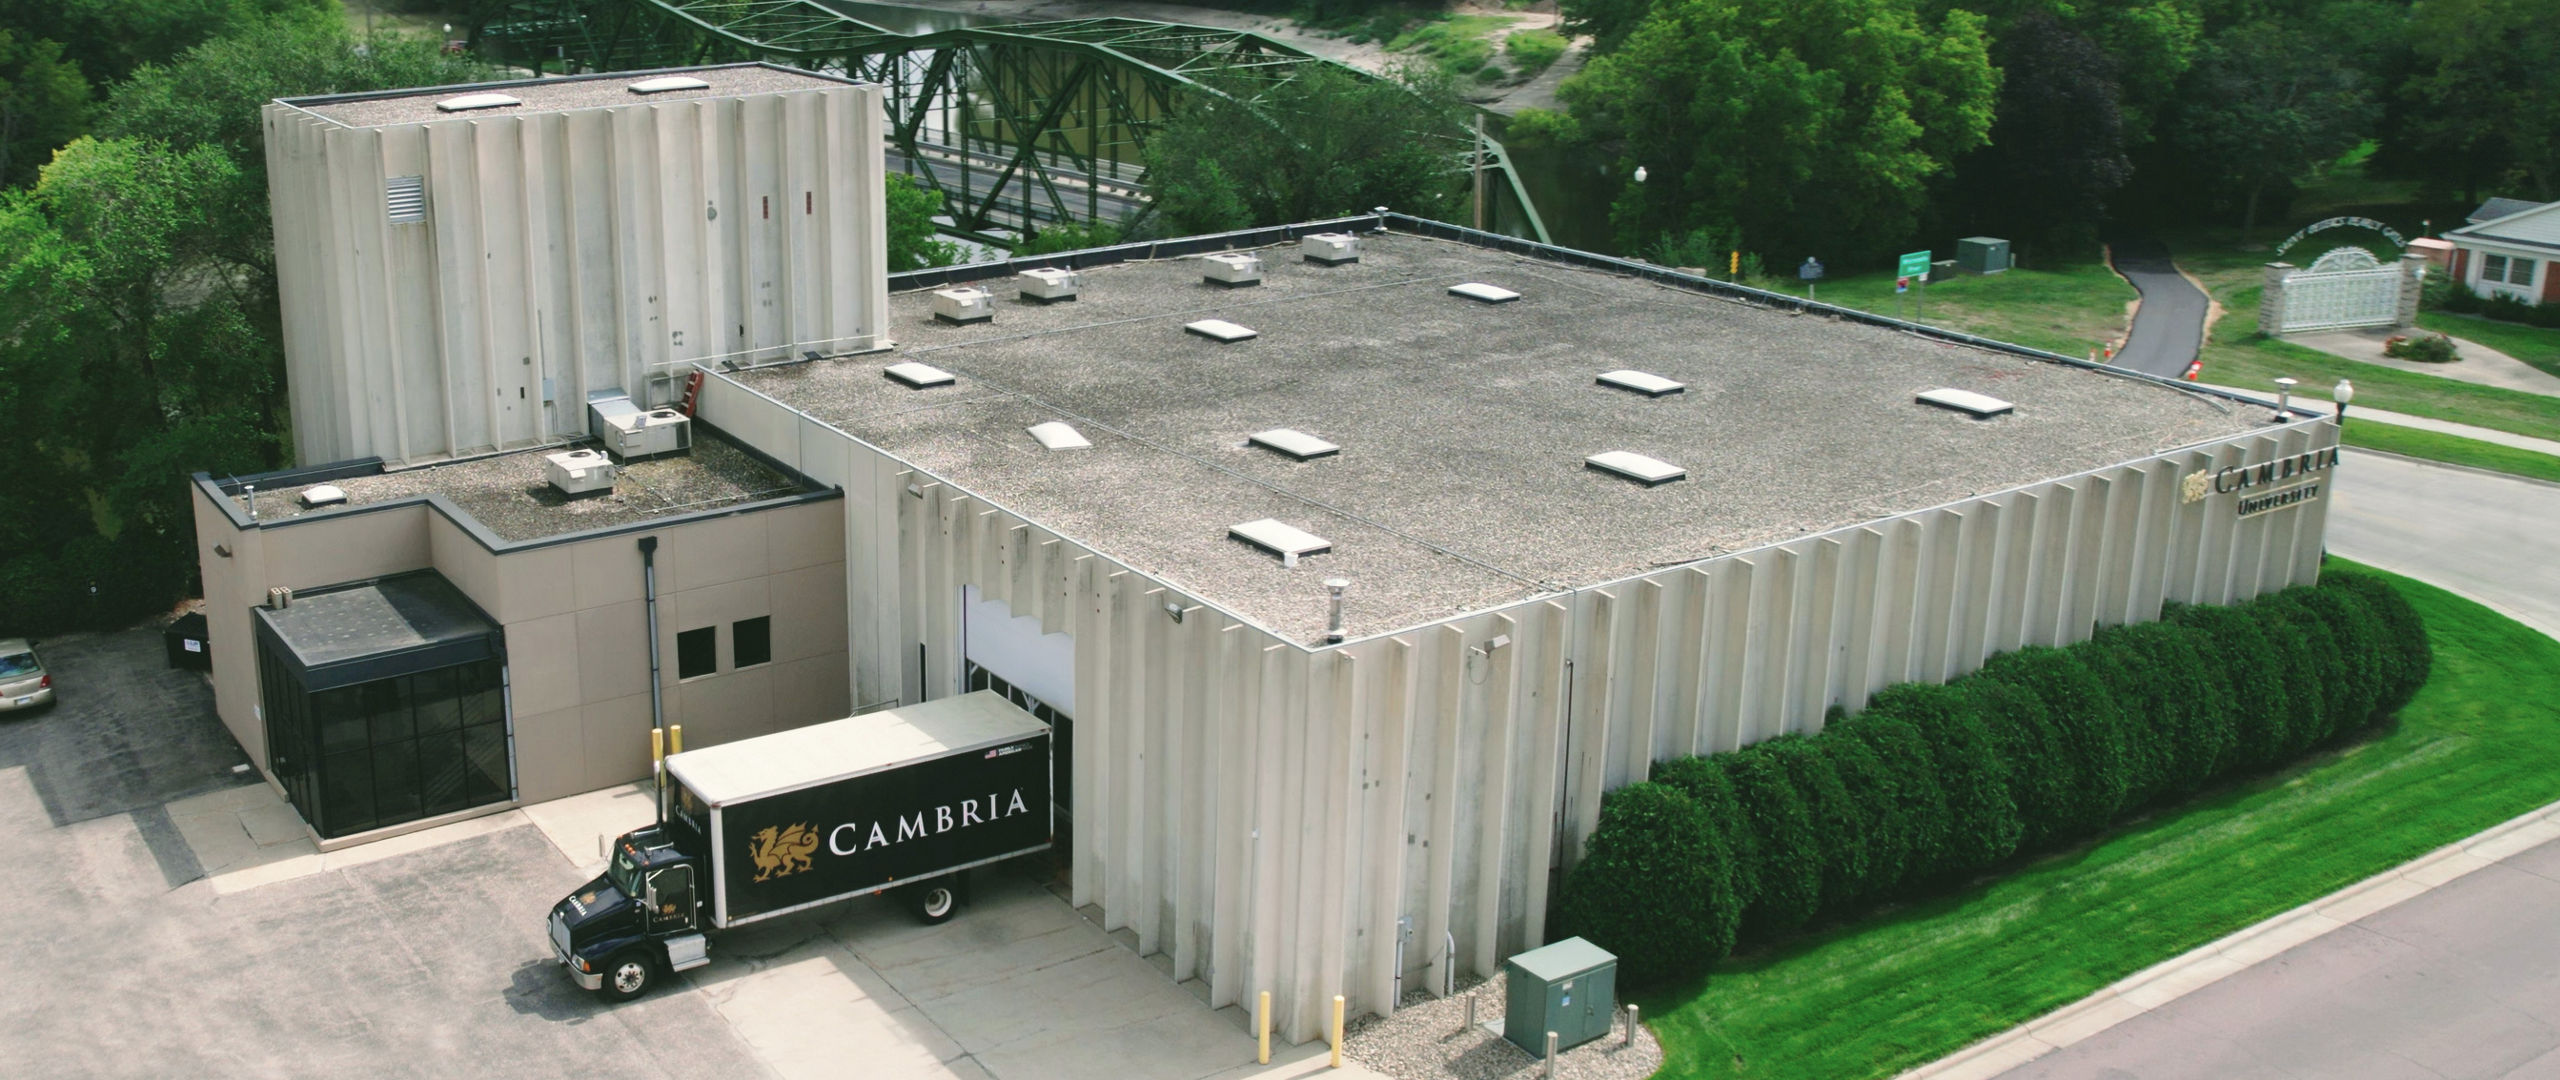 The back of Cambria University including a Cambria truck at the loading dock